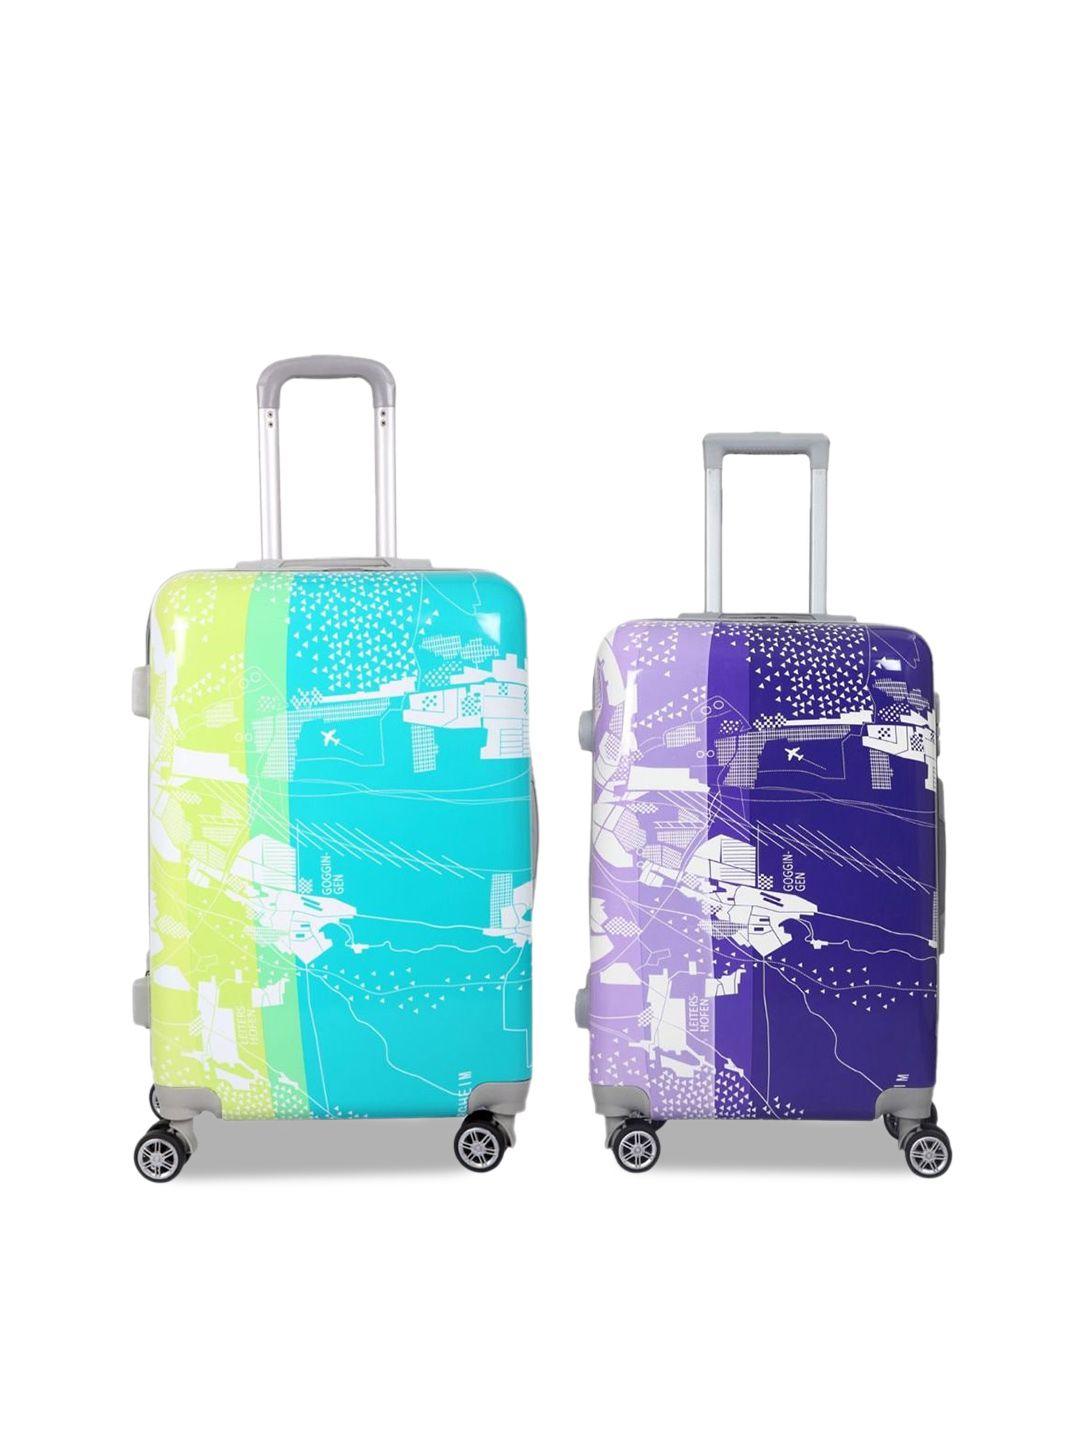 polo class unisex set of 2 printed hard-sided trolley suitcases